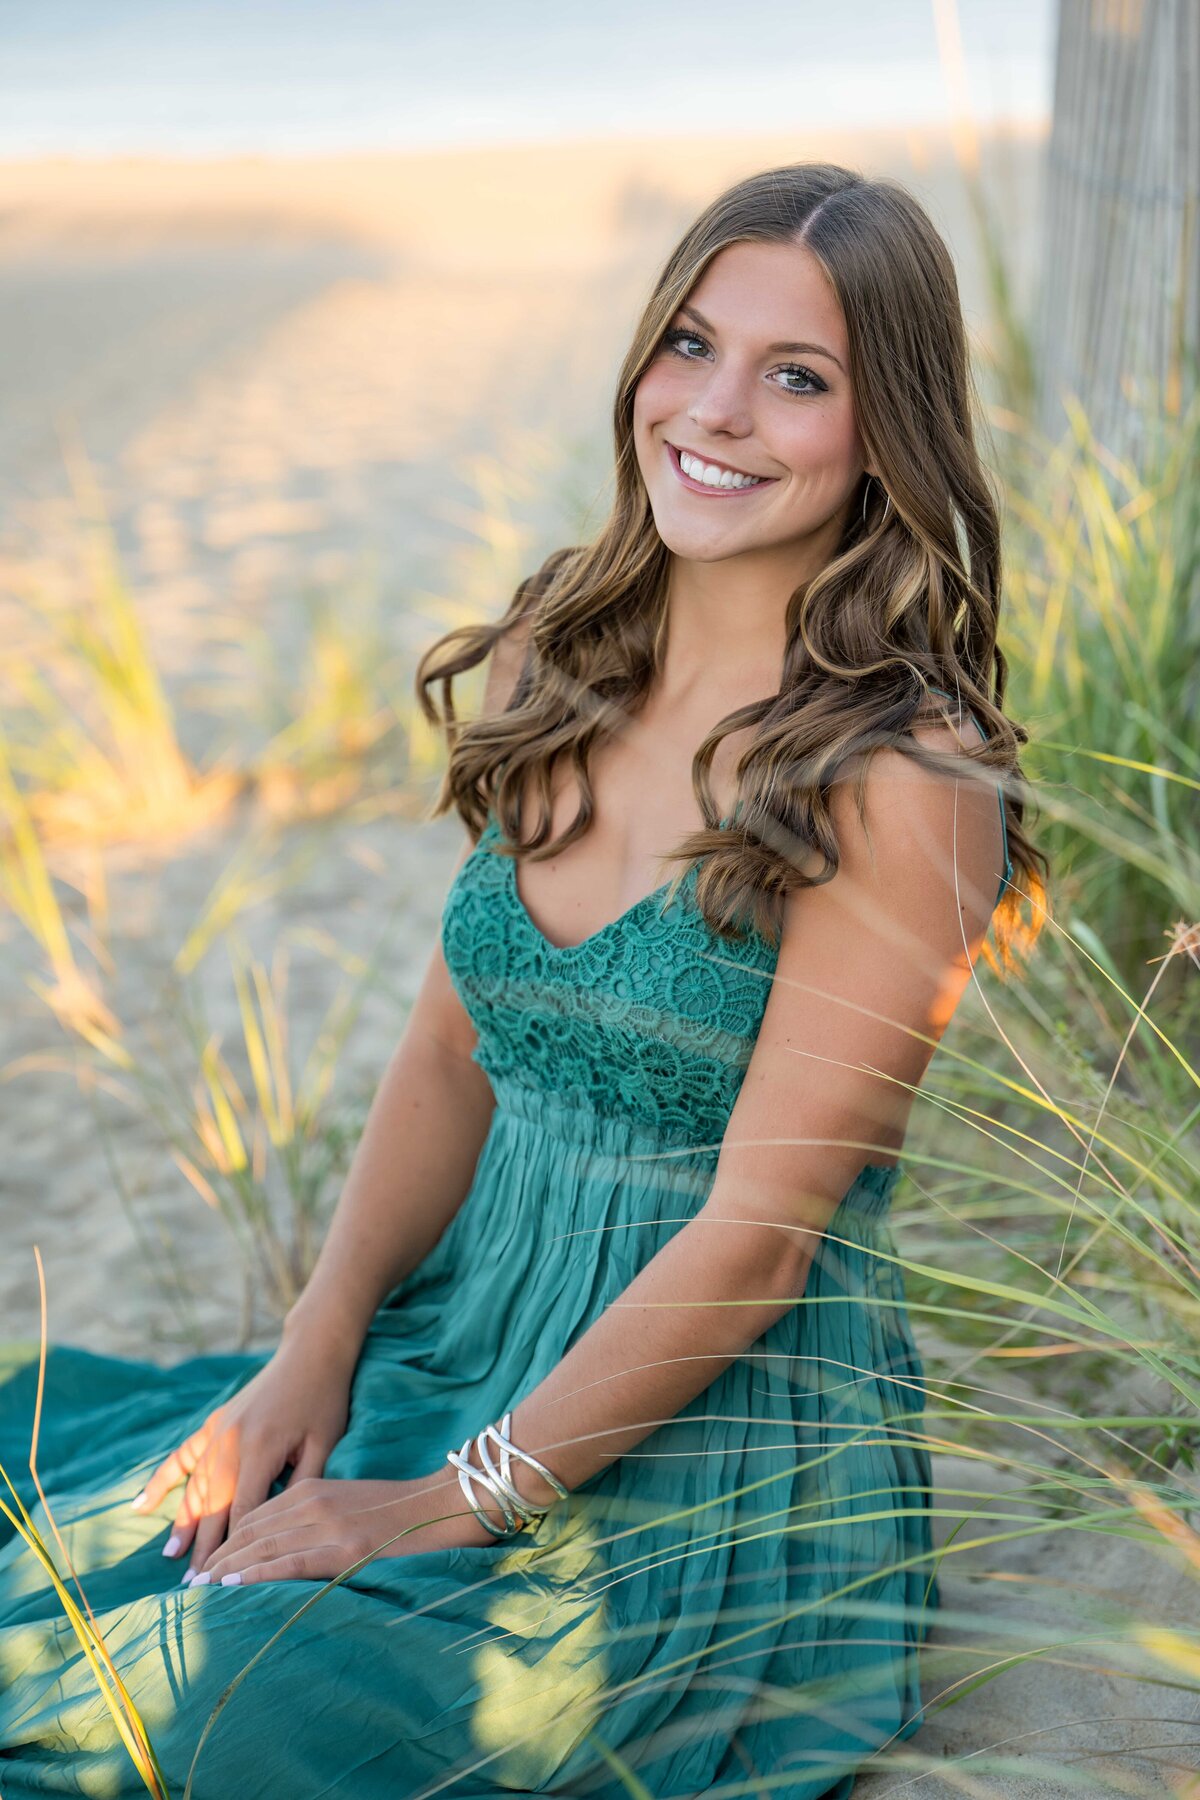 Senior pictures at the beach